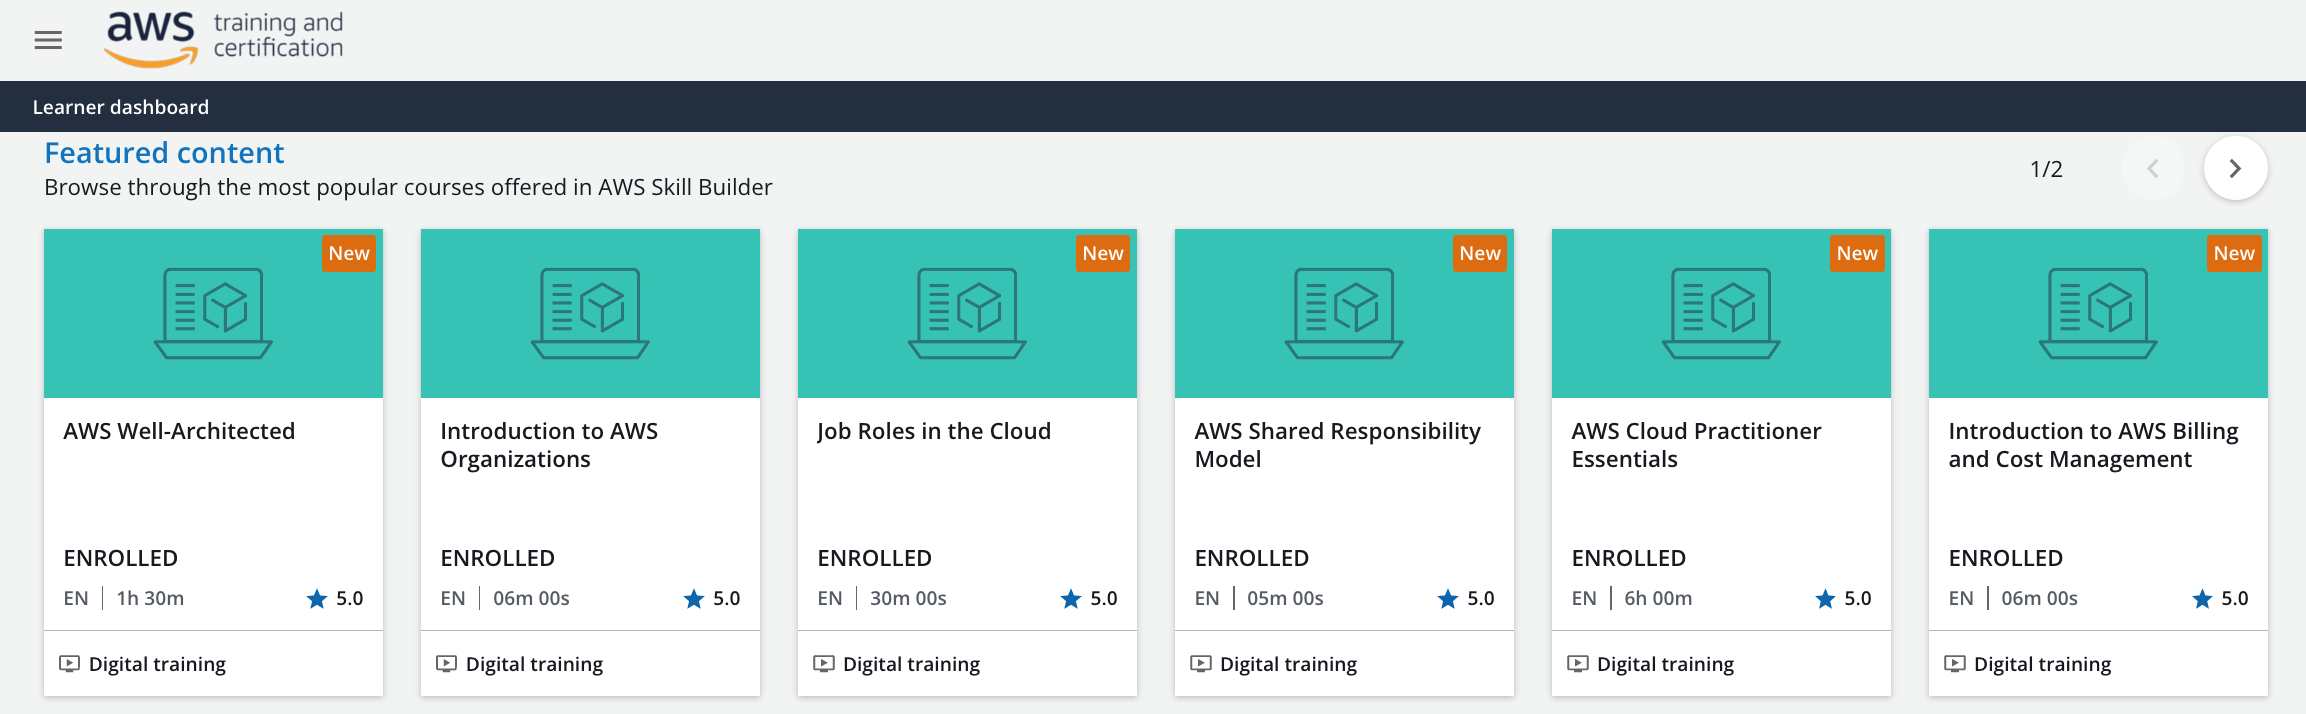 AWS_Skill_Builder_Featured_Content